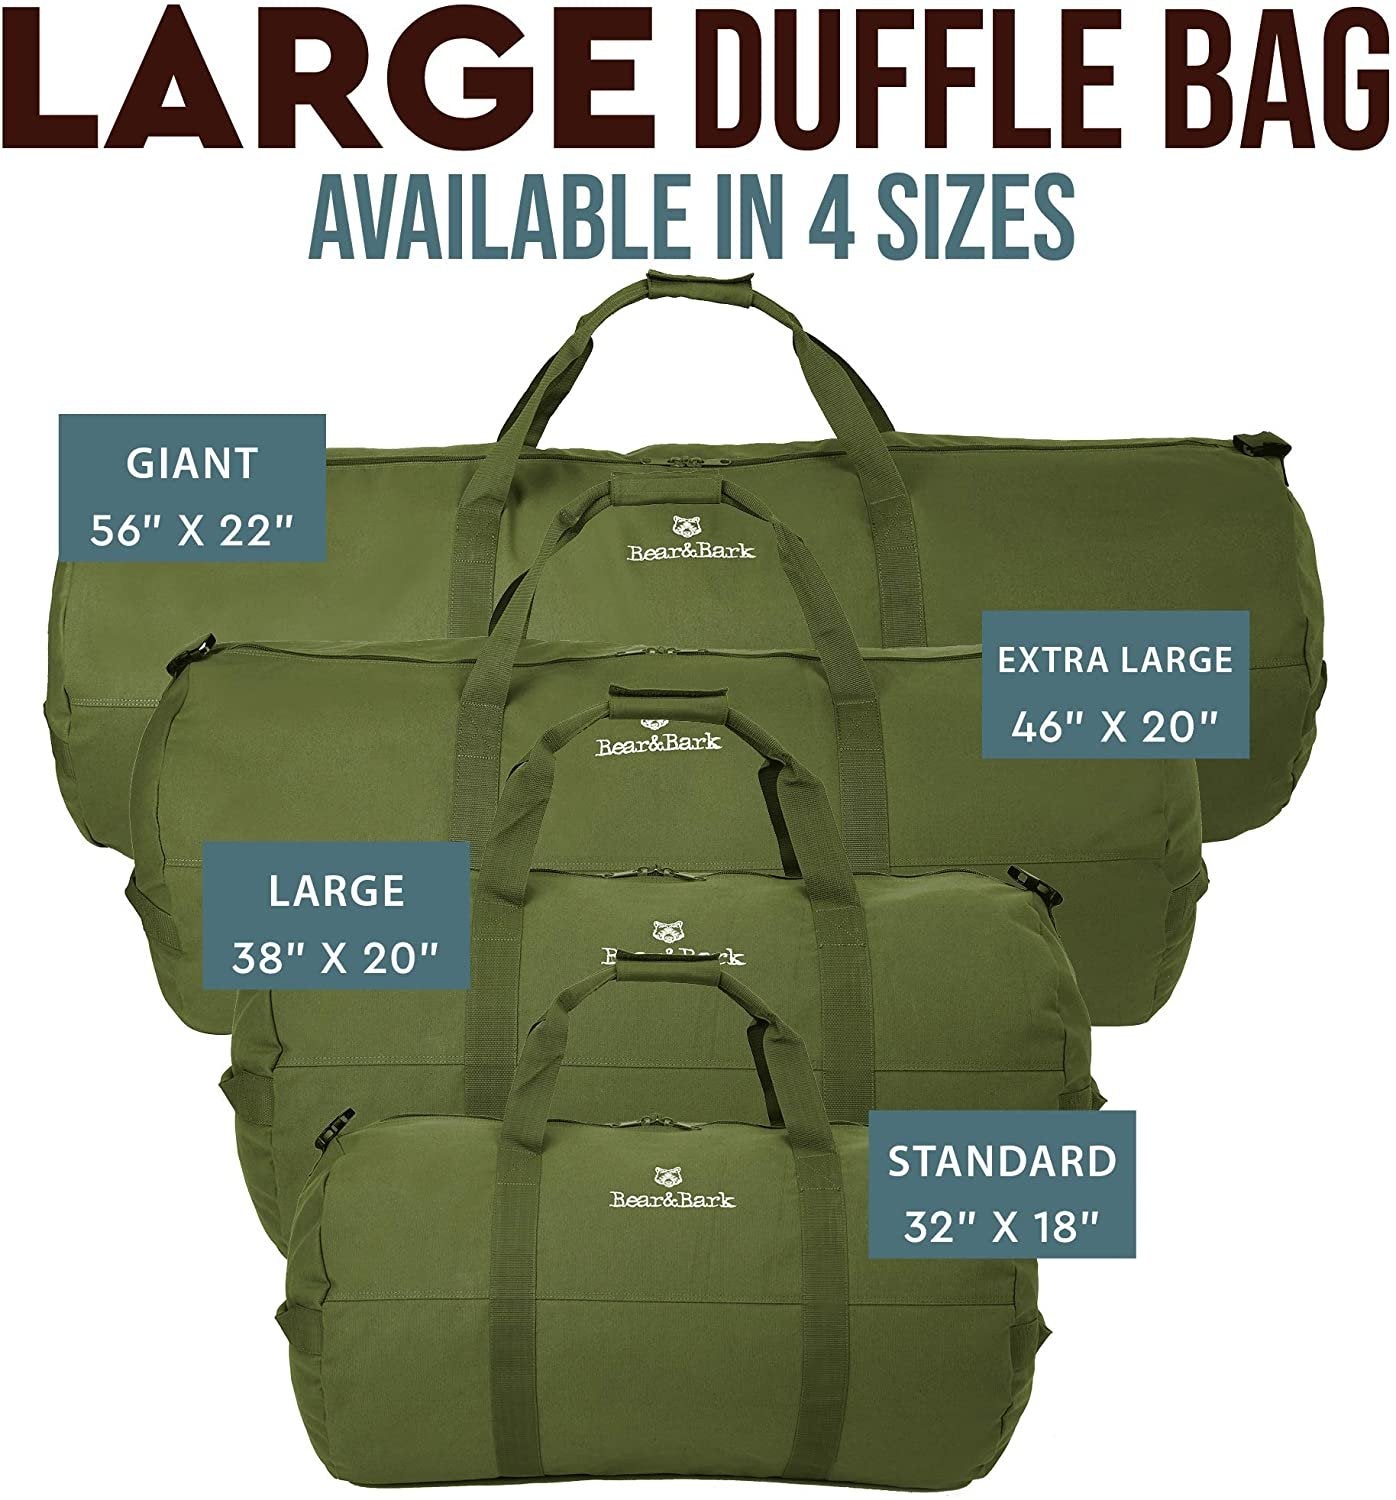 Desert Brown Military Canvas Duffel Bag Giant 56x22 - Army Cargo Style Carryall for Men and Women